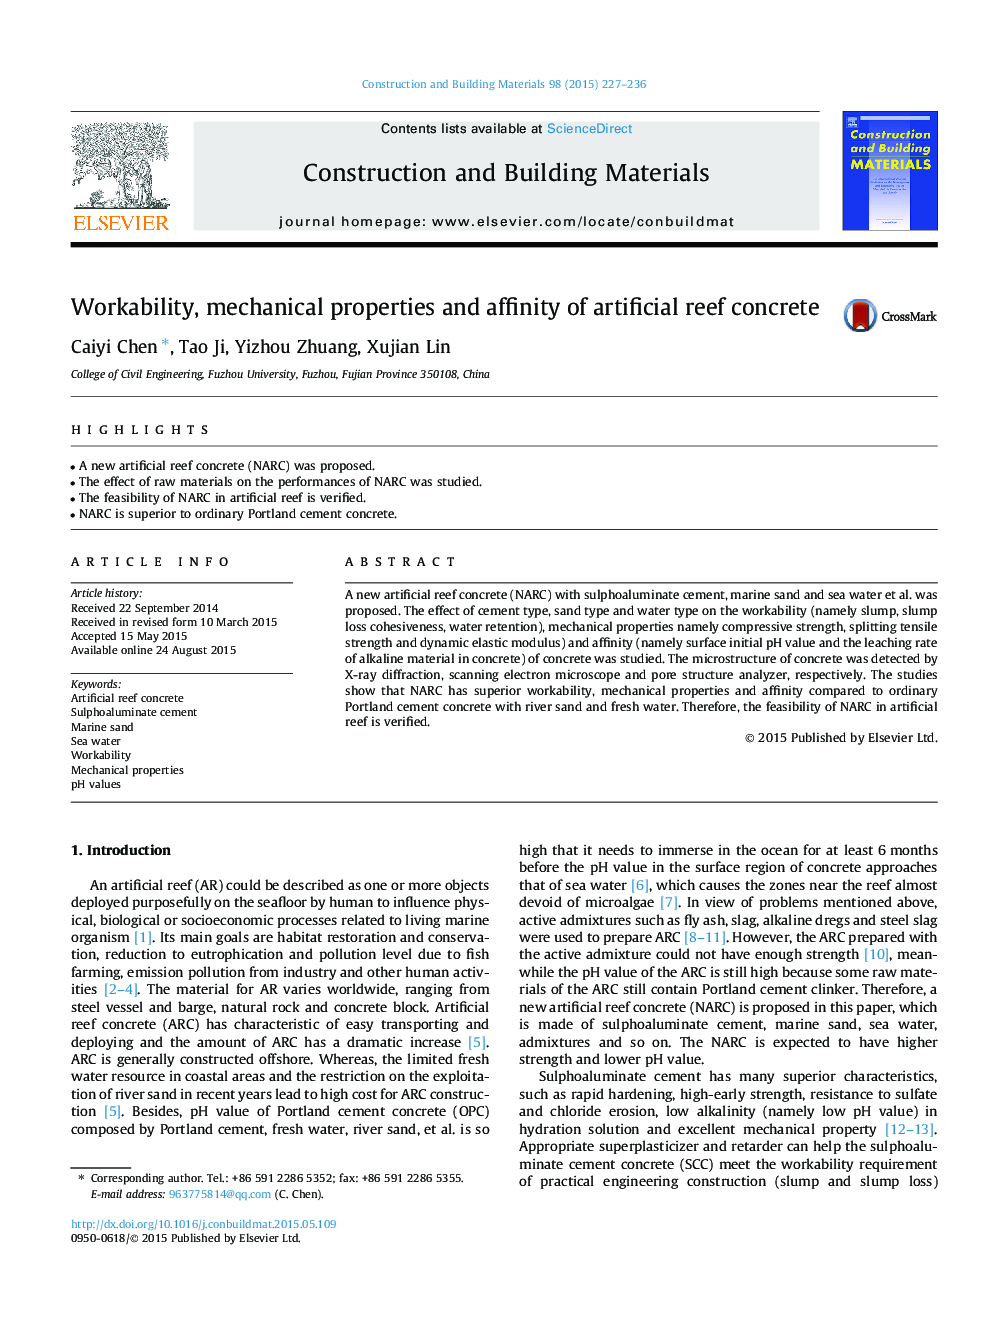 Workability, mechanical properties and affinity of artificial reef concrete